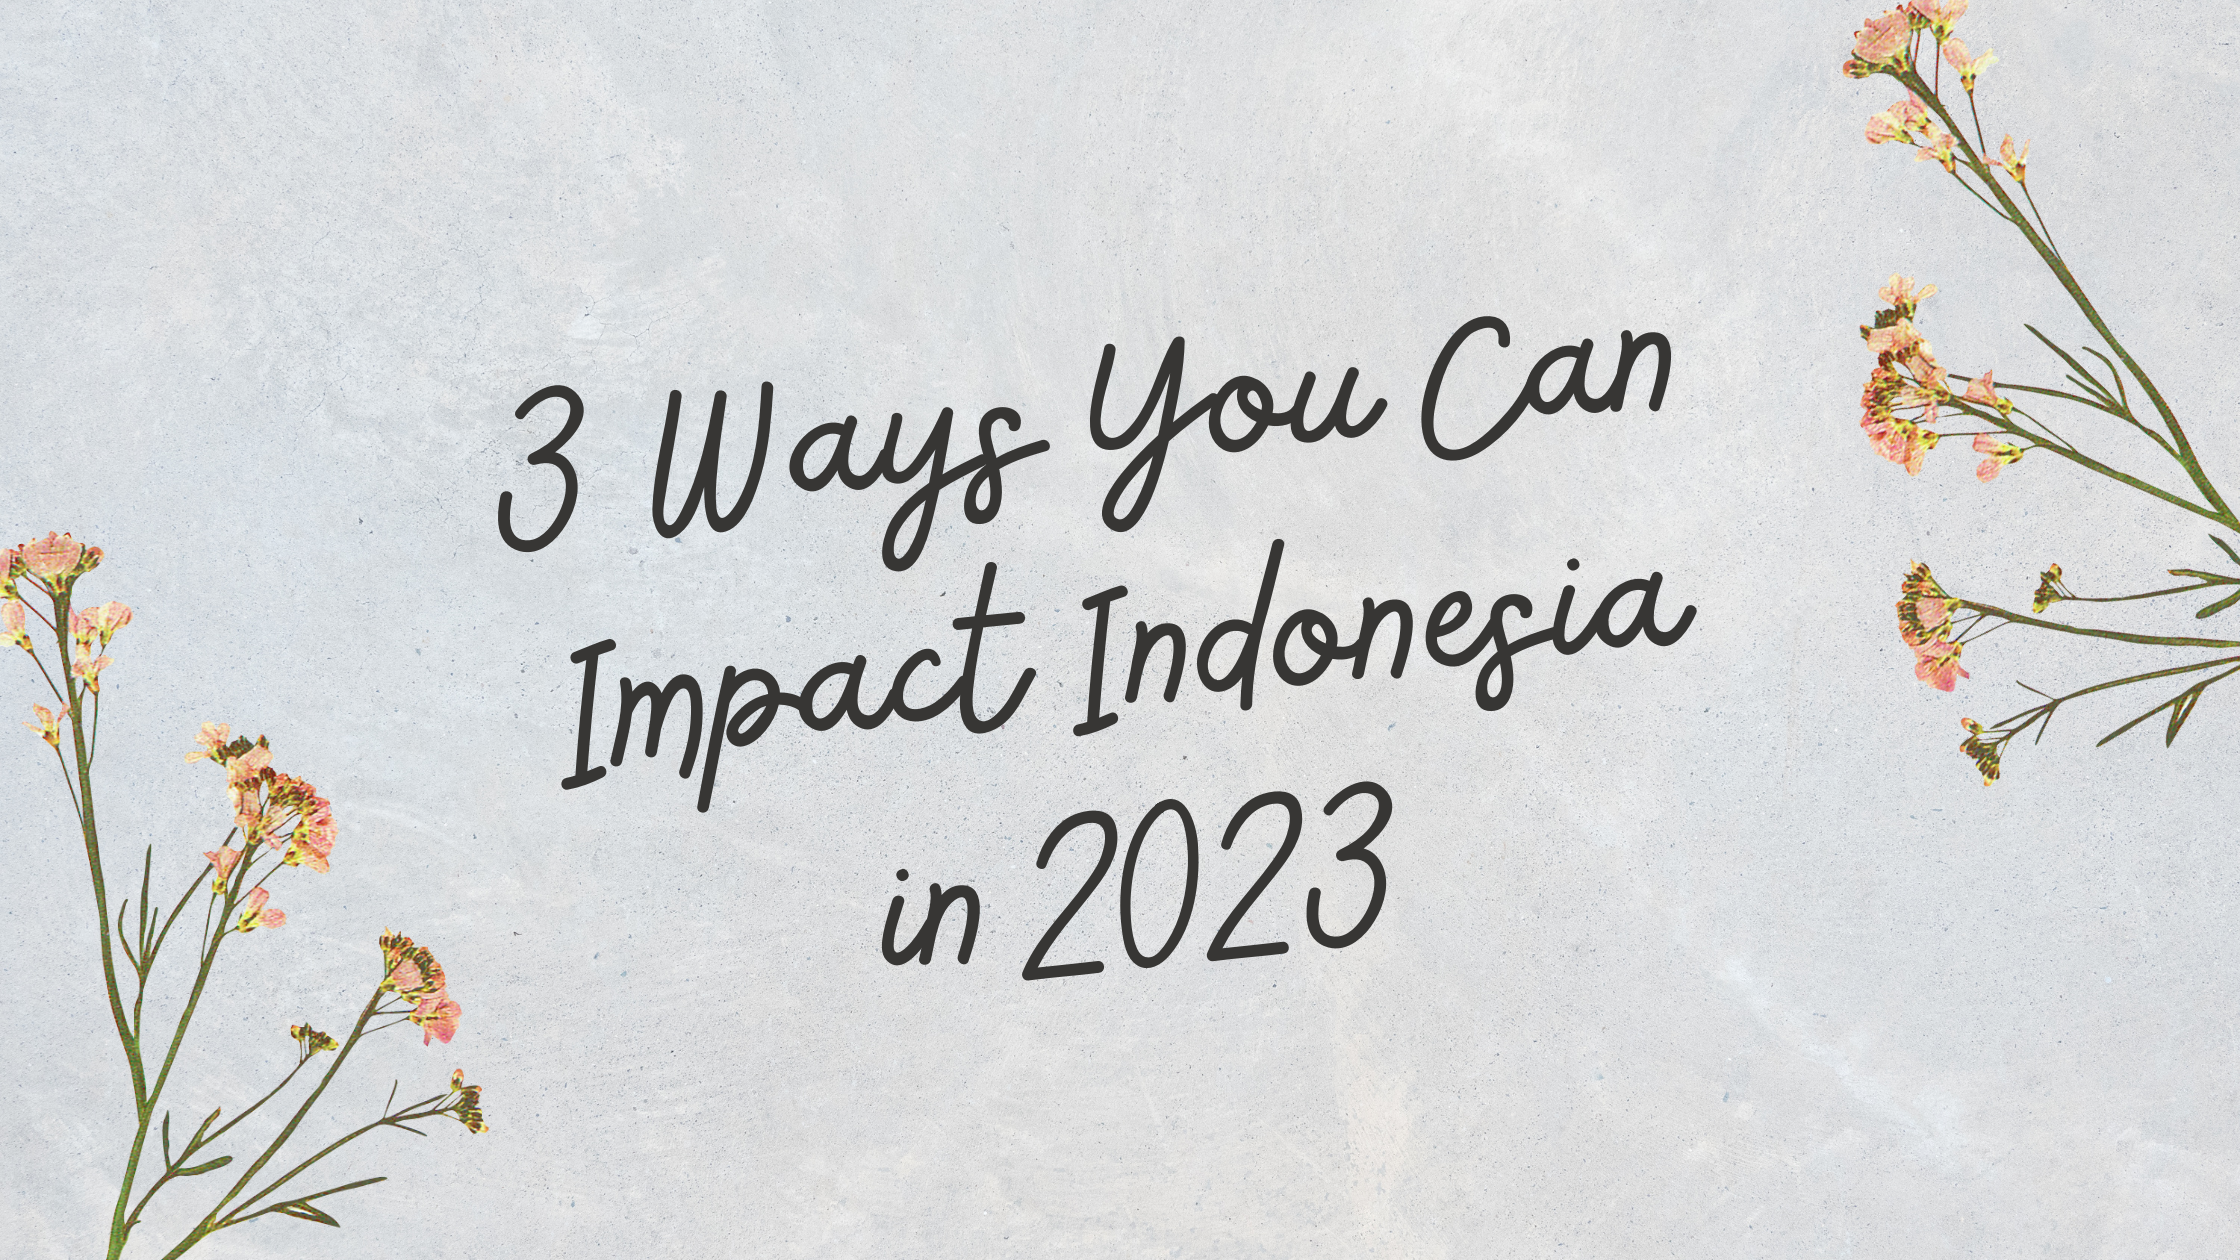 3 Ways You Can Impact Indonesia